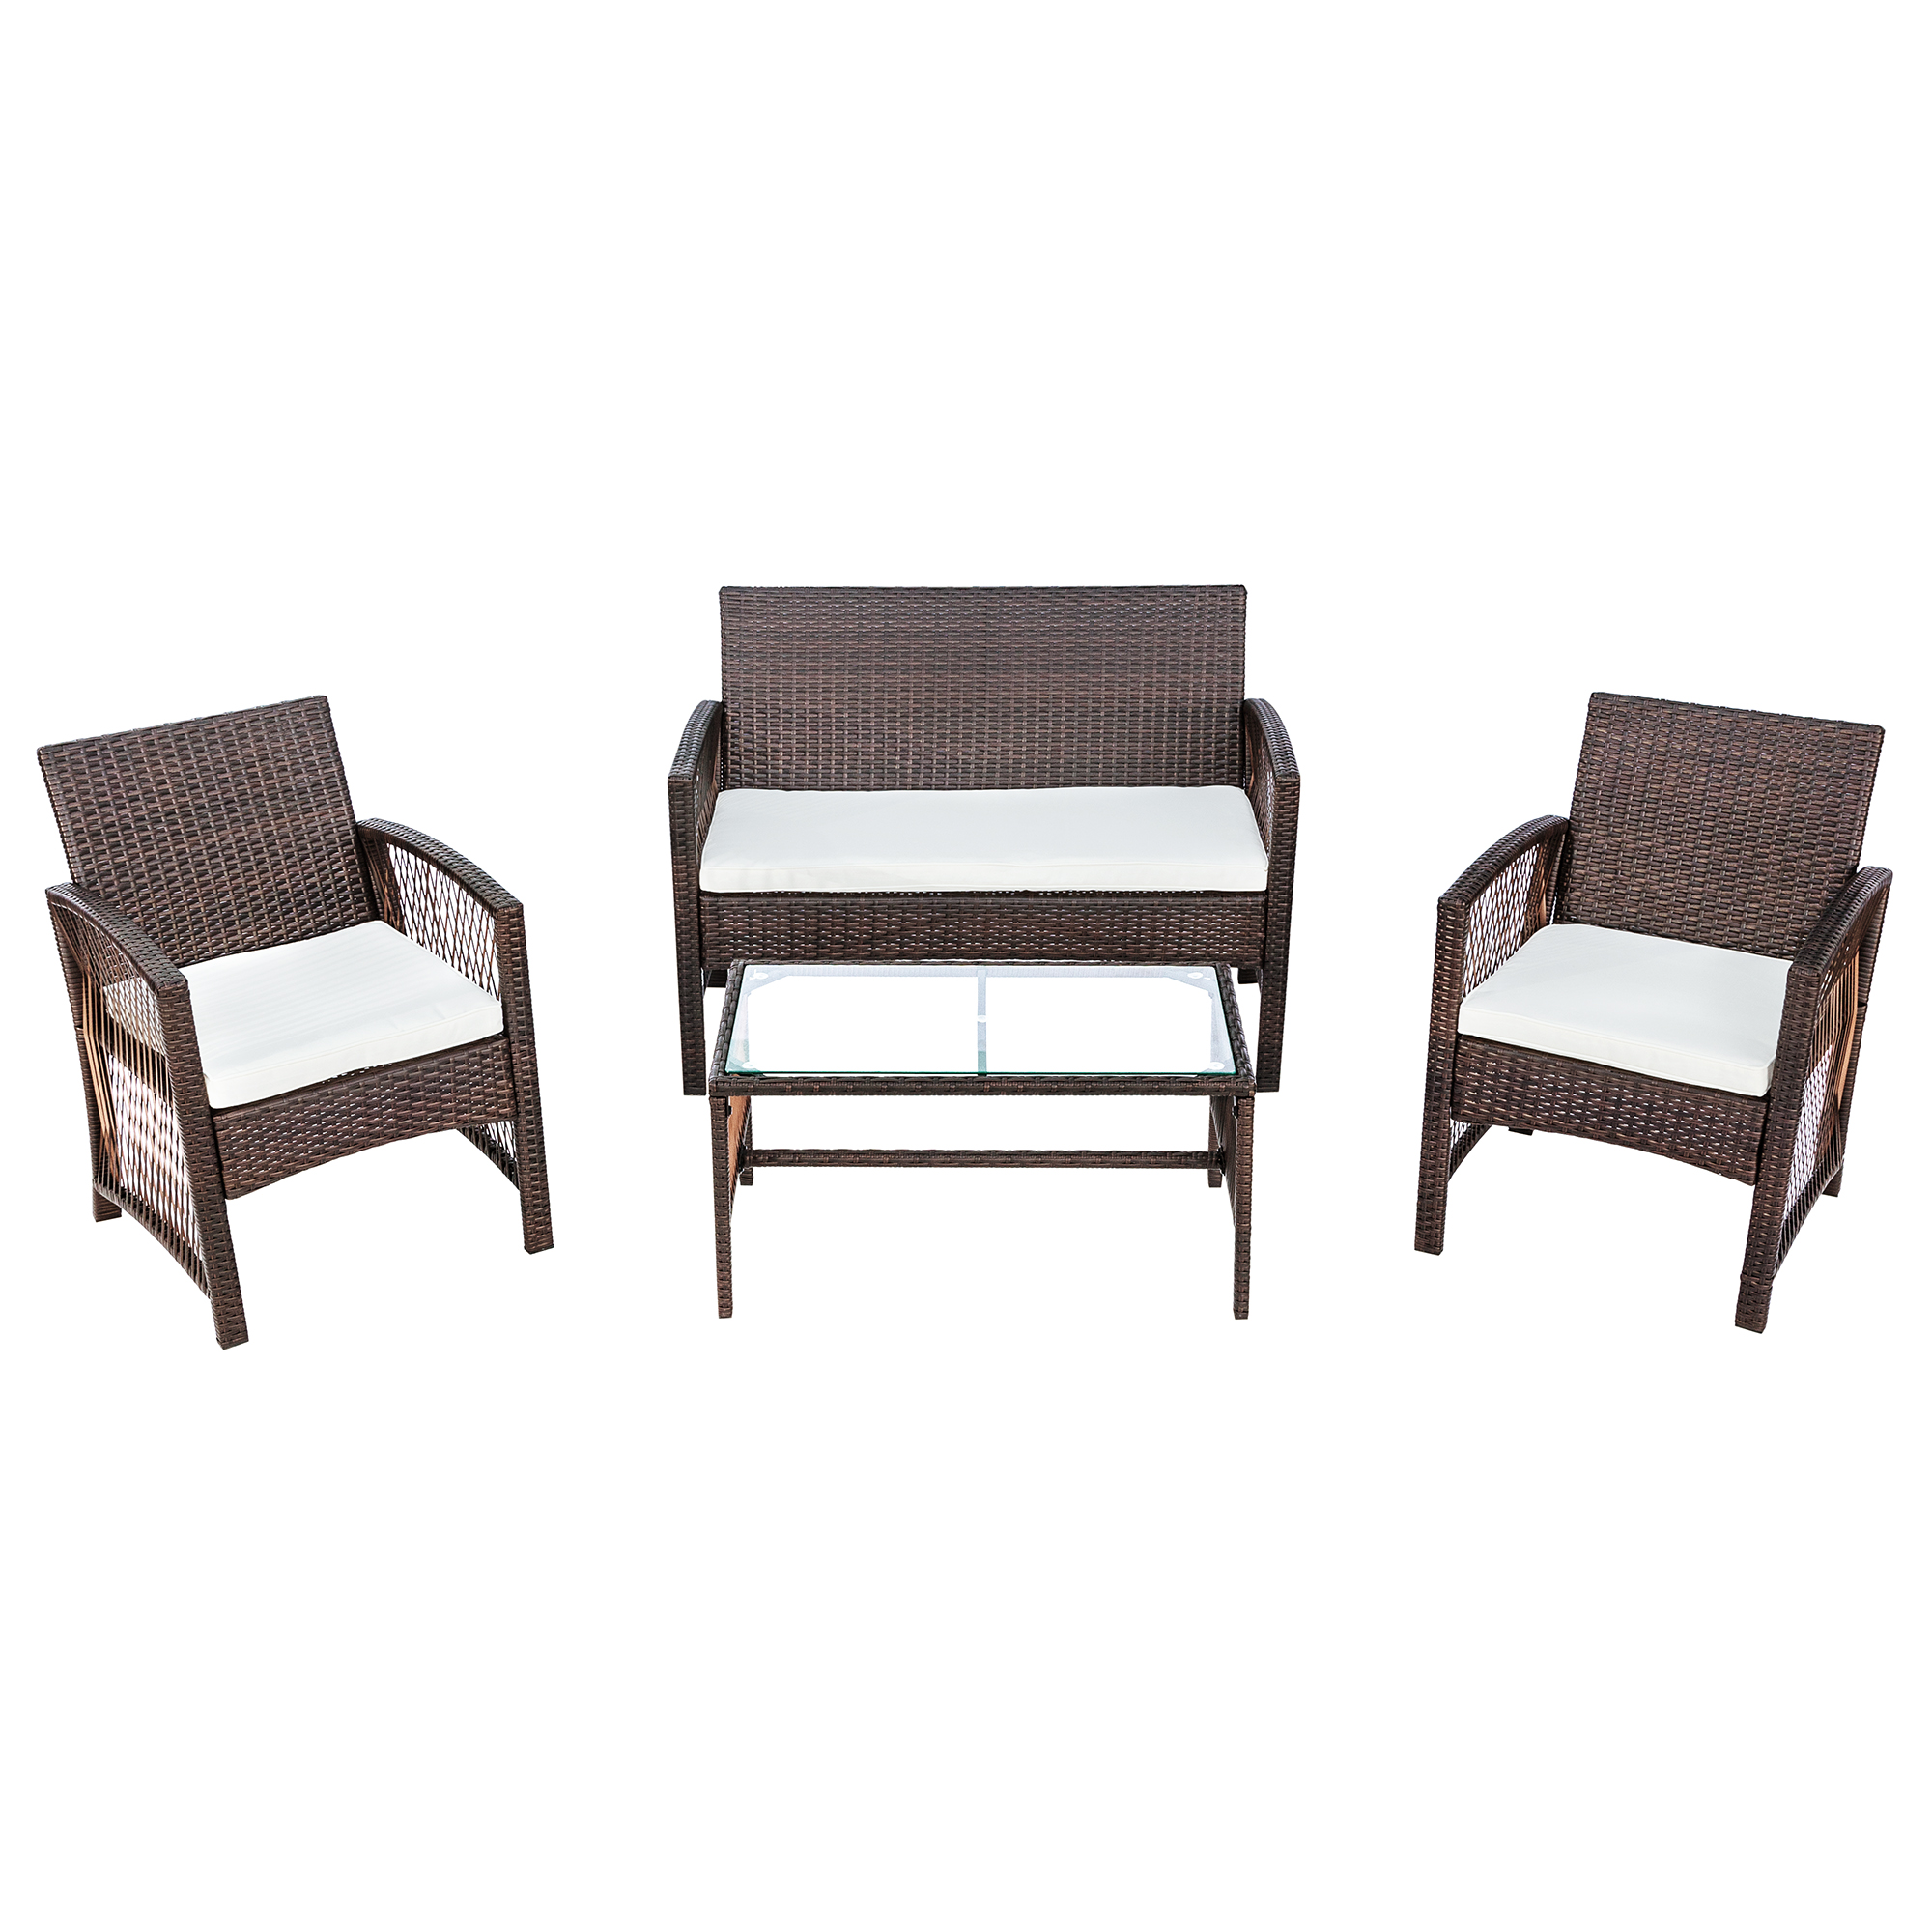 4 Pieces Rattan Chair Wicker Set, Outdoor Patio Furniture Sets Clearance with Two Single Sofa, One Loveseat, Tempered Glass Table, Backyard Porch Garden Poolside Balcony Furniture Sets, Q8553 - image 4 of 12